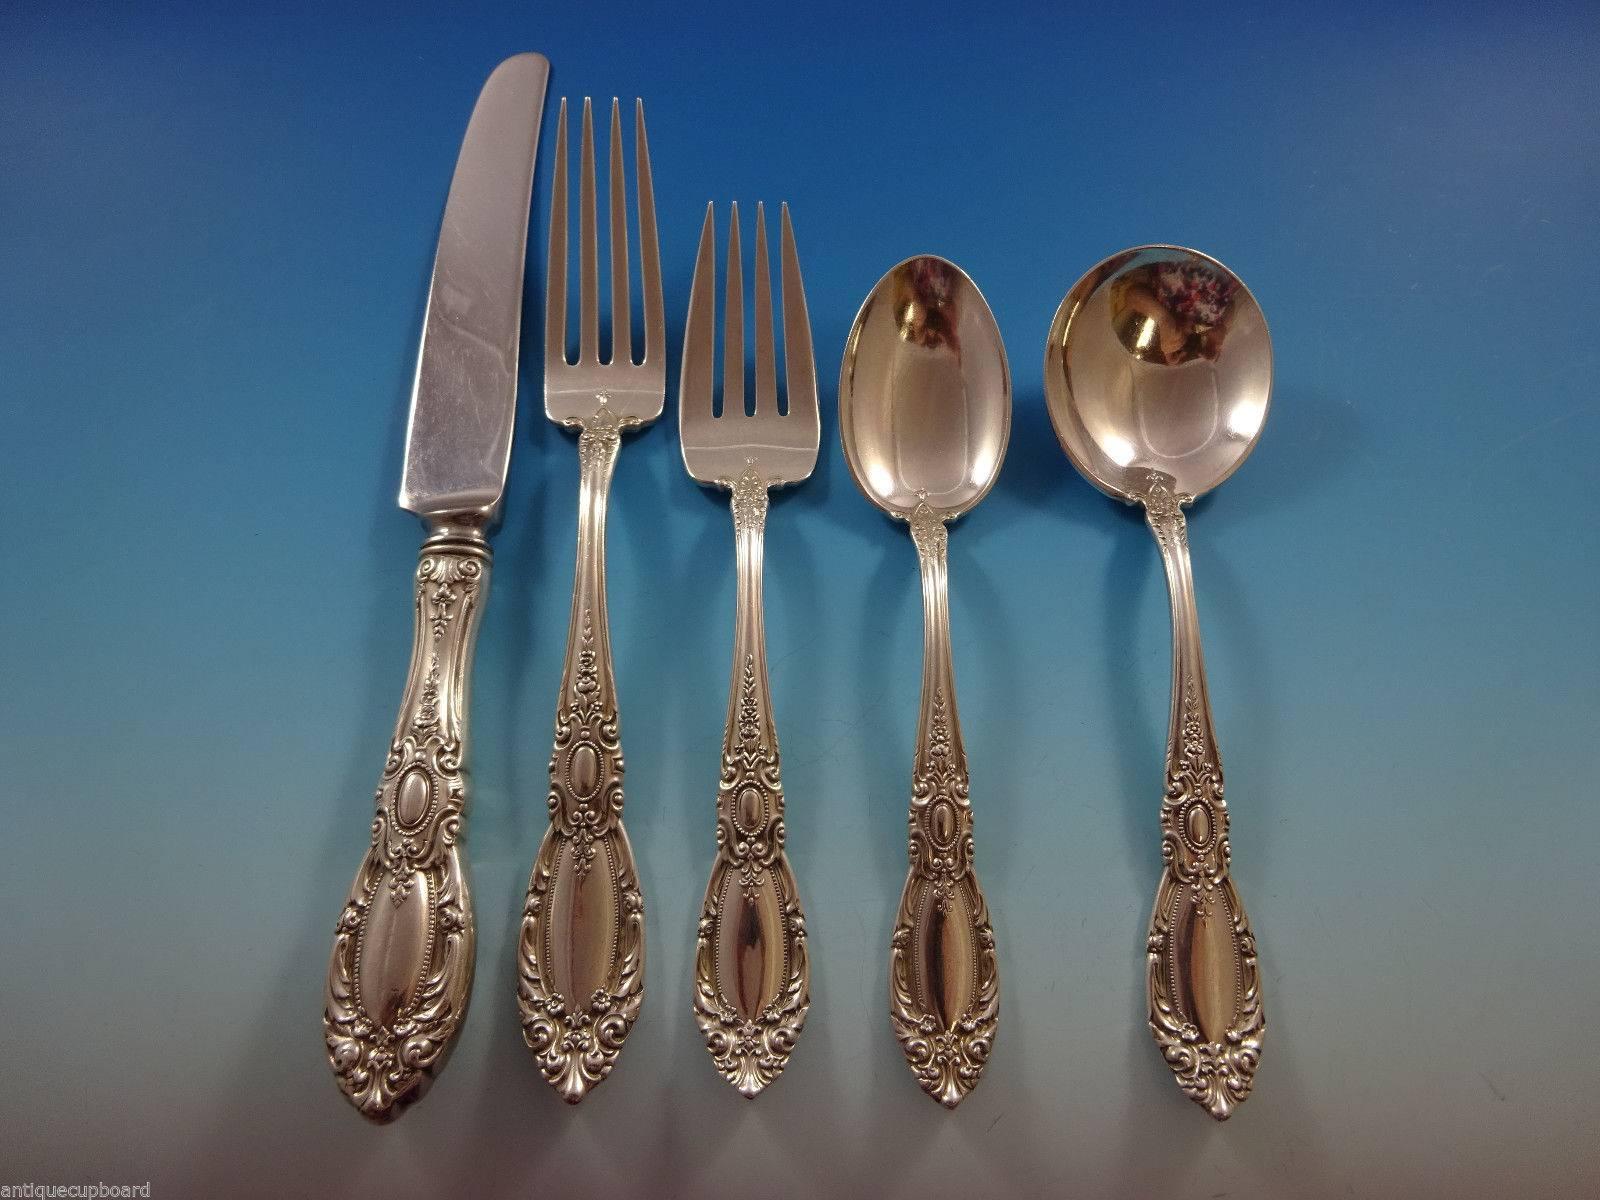 King Richard by Towle sterling silver flatware set of 40 pieces. This set includes:

Measure: Eight knives, 8 7/8